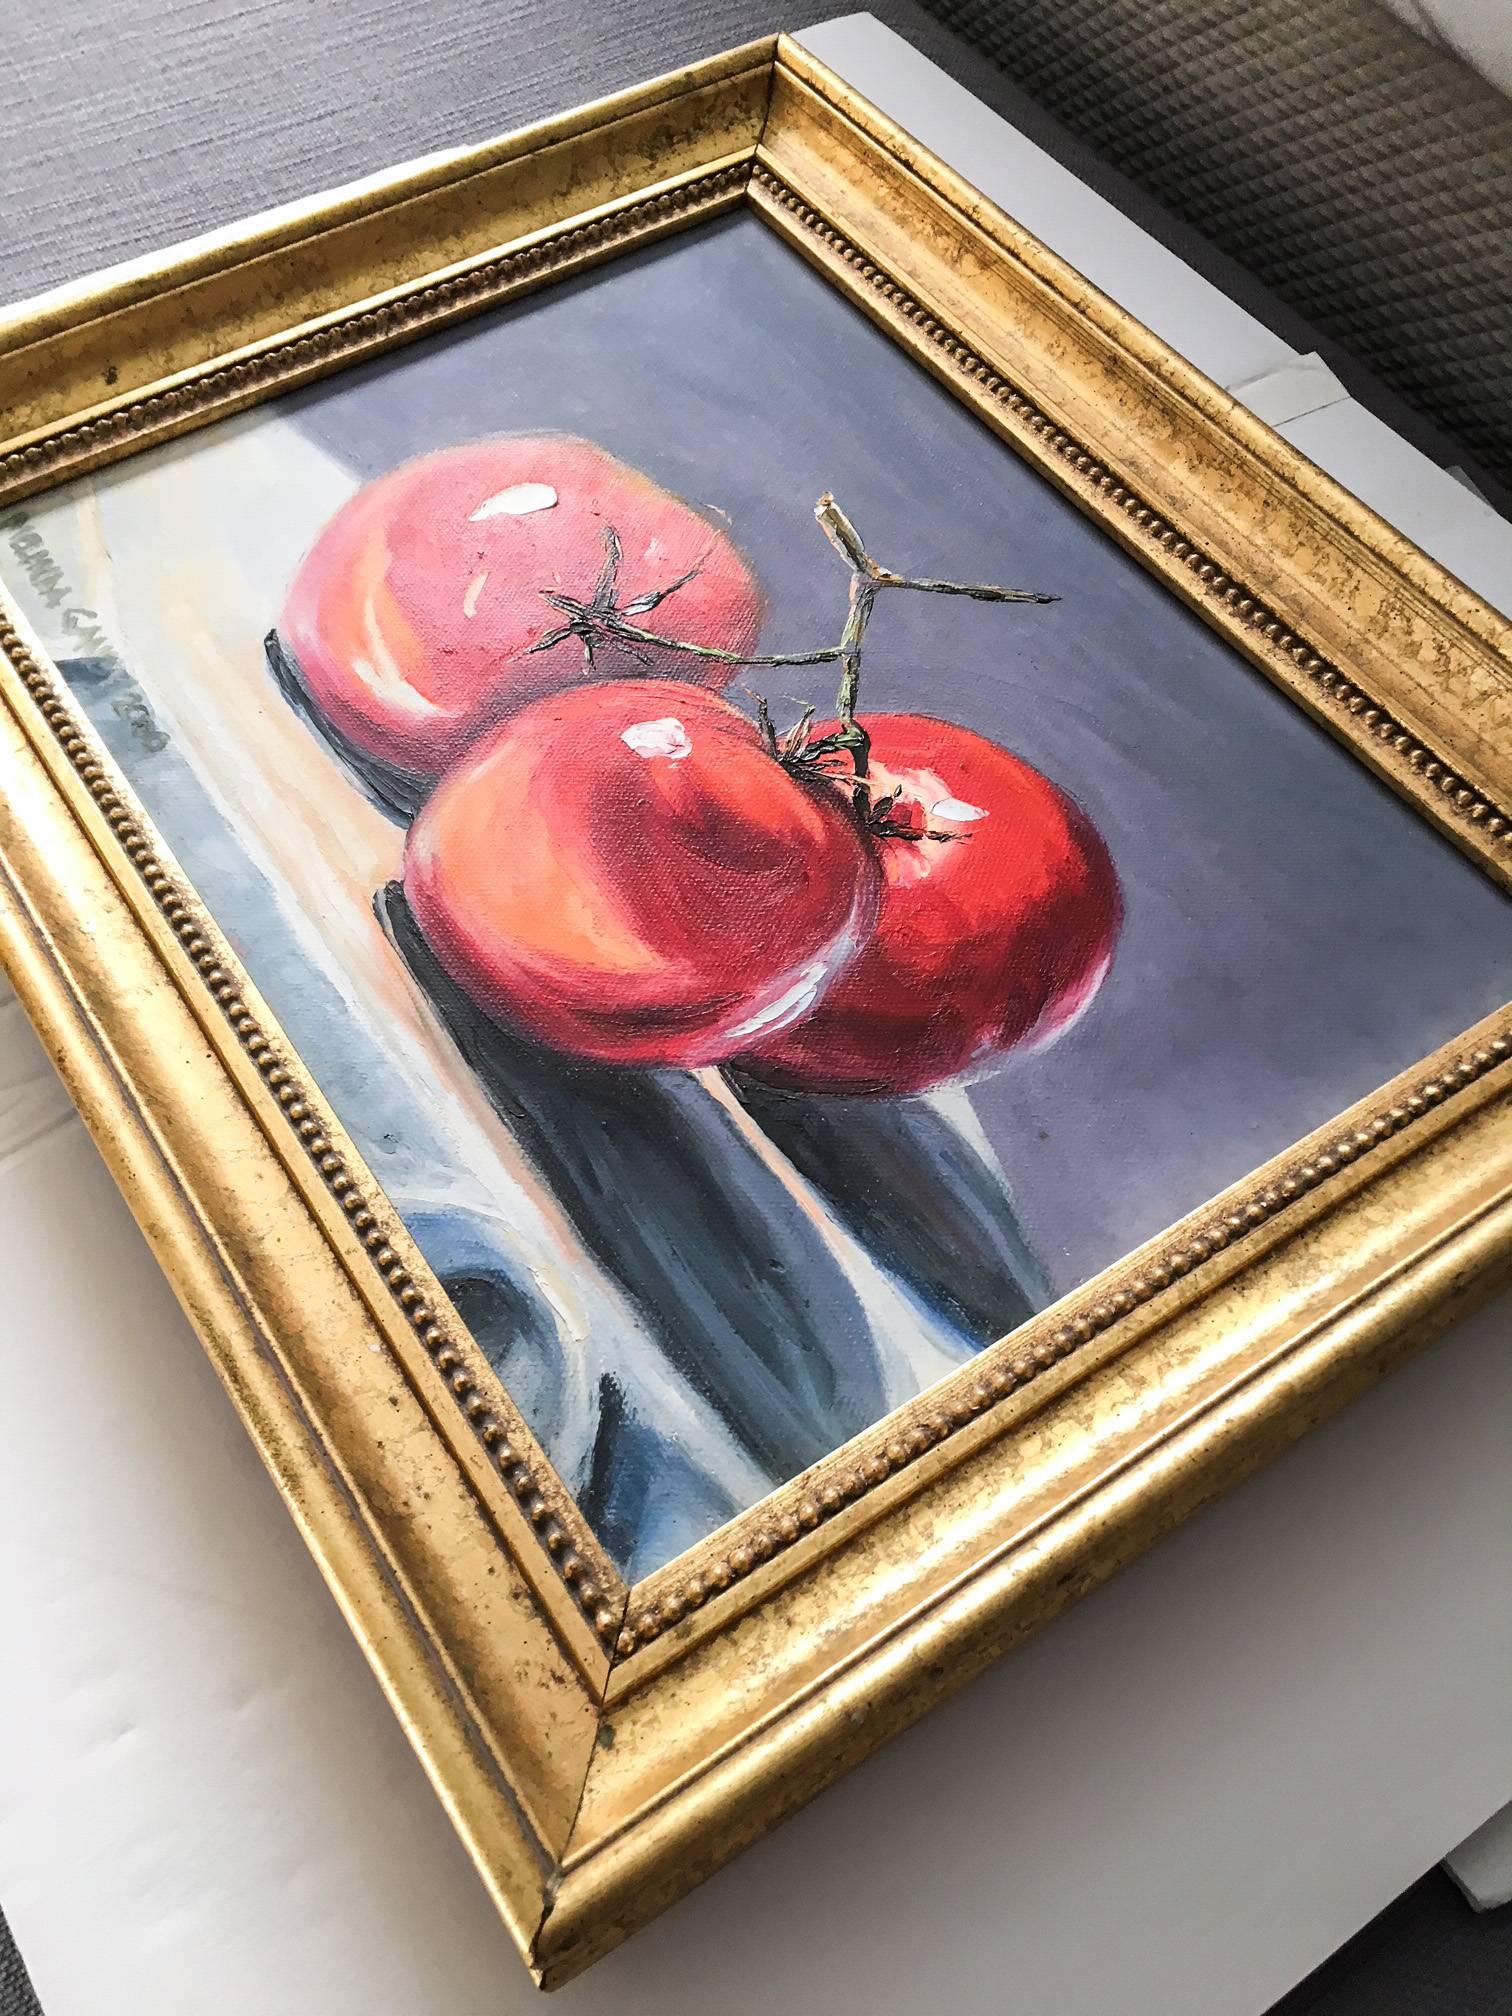 Painted Composition of Three Tomatoes by Melinda Gandy, 2000